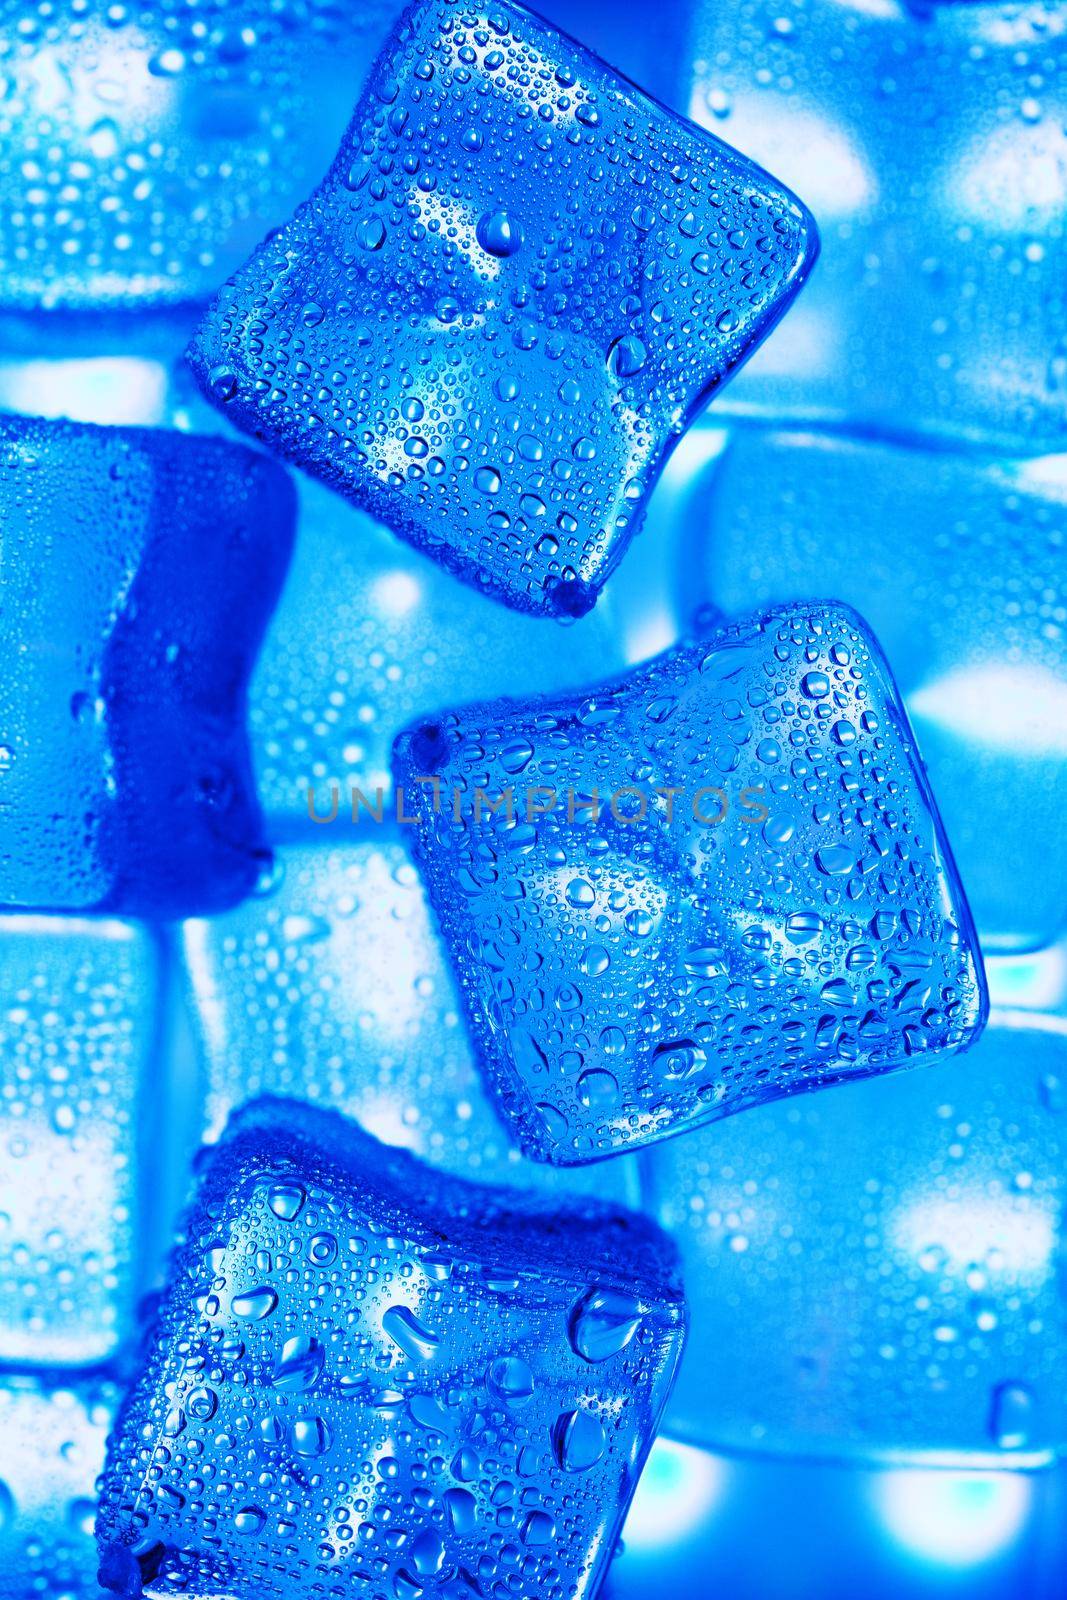 Ice cubes with blue backlight in the freezer close-up in full screen by AlexGrec